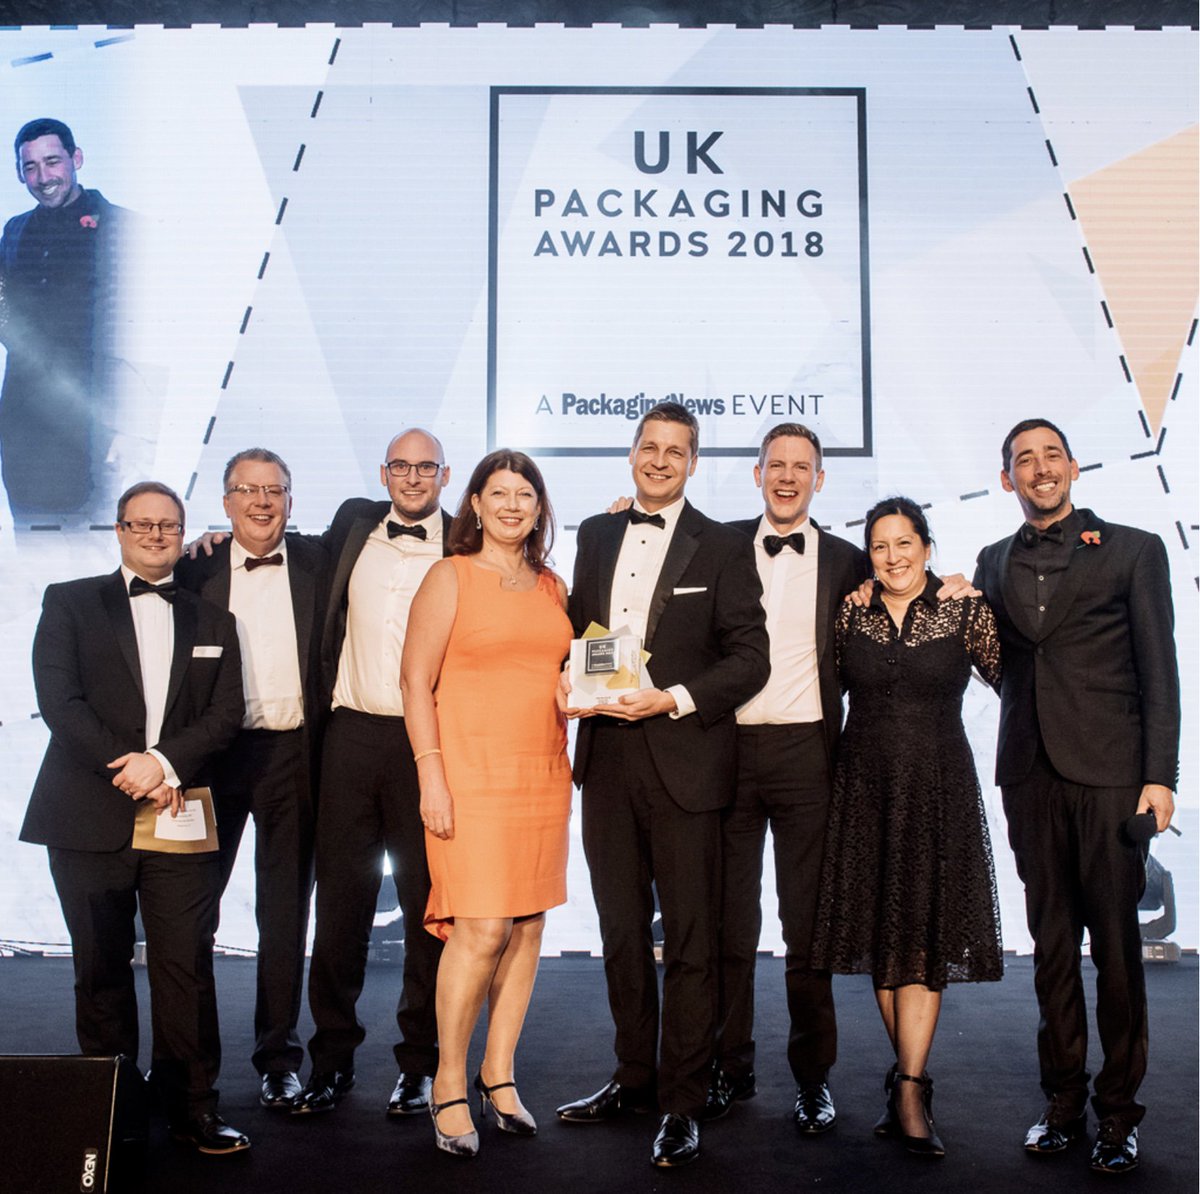 We're delighted to announce that EP Design House won Design Team of the Year at last nights #UKPackagingAwards! A testament to the amazing work they continue to produce in packaging design and innovation! Well done team!